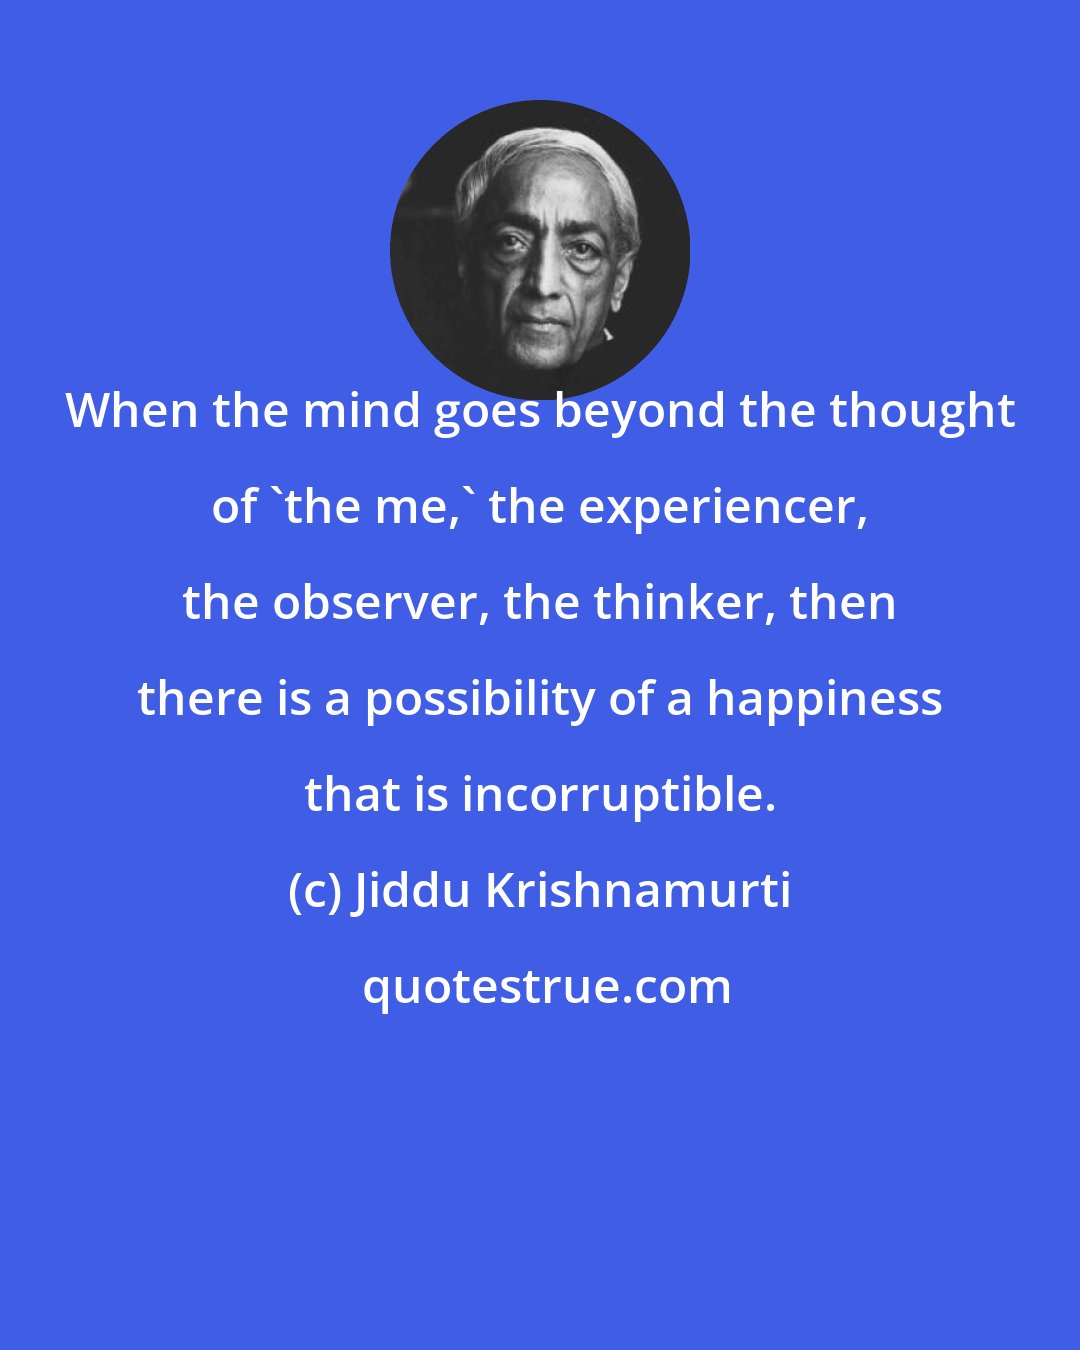 Jiddu Krishnamurti: When the mind goes beyond the thought of 'the me,' the experiencer, the observer, the thinker, then there is a possibility of a happiness that is incorruptible.